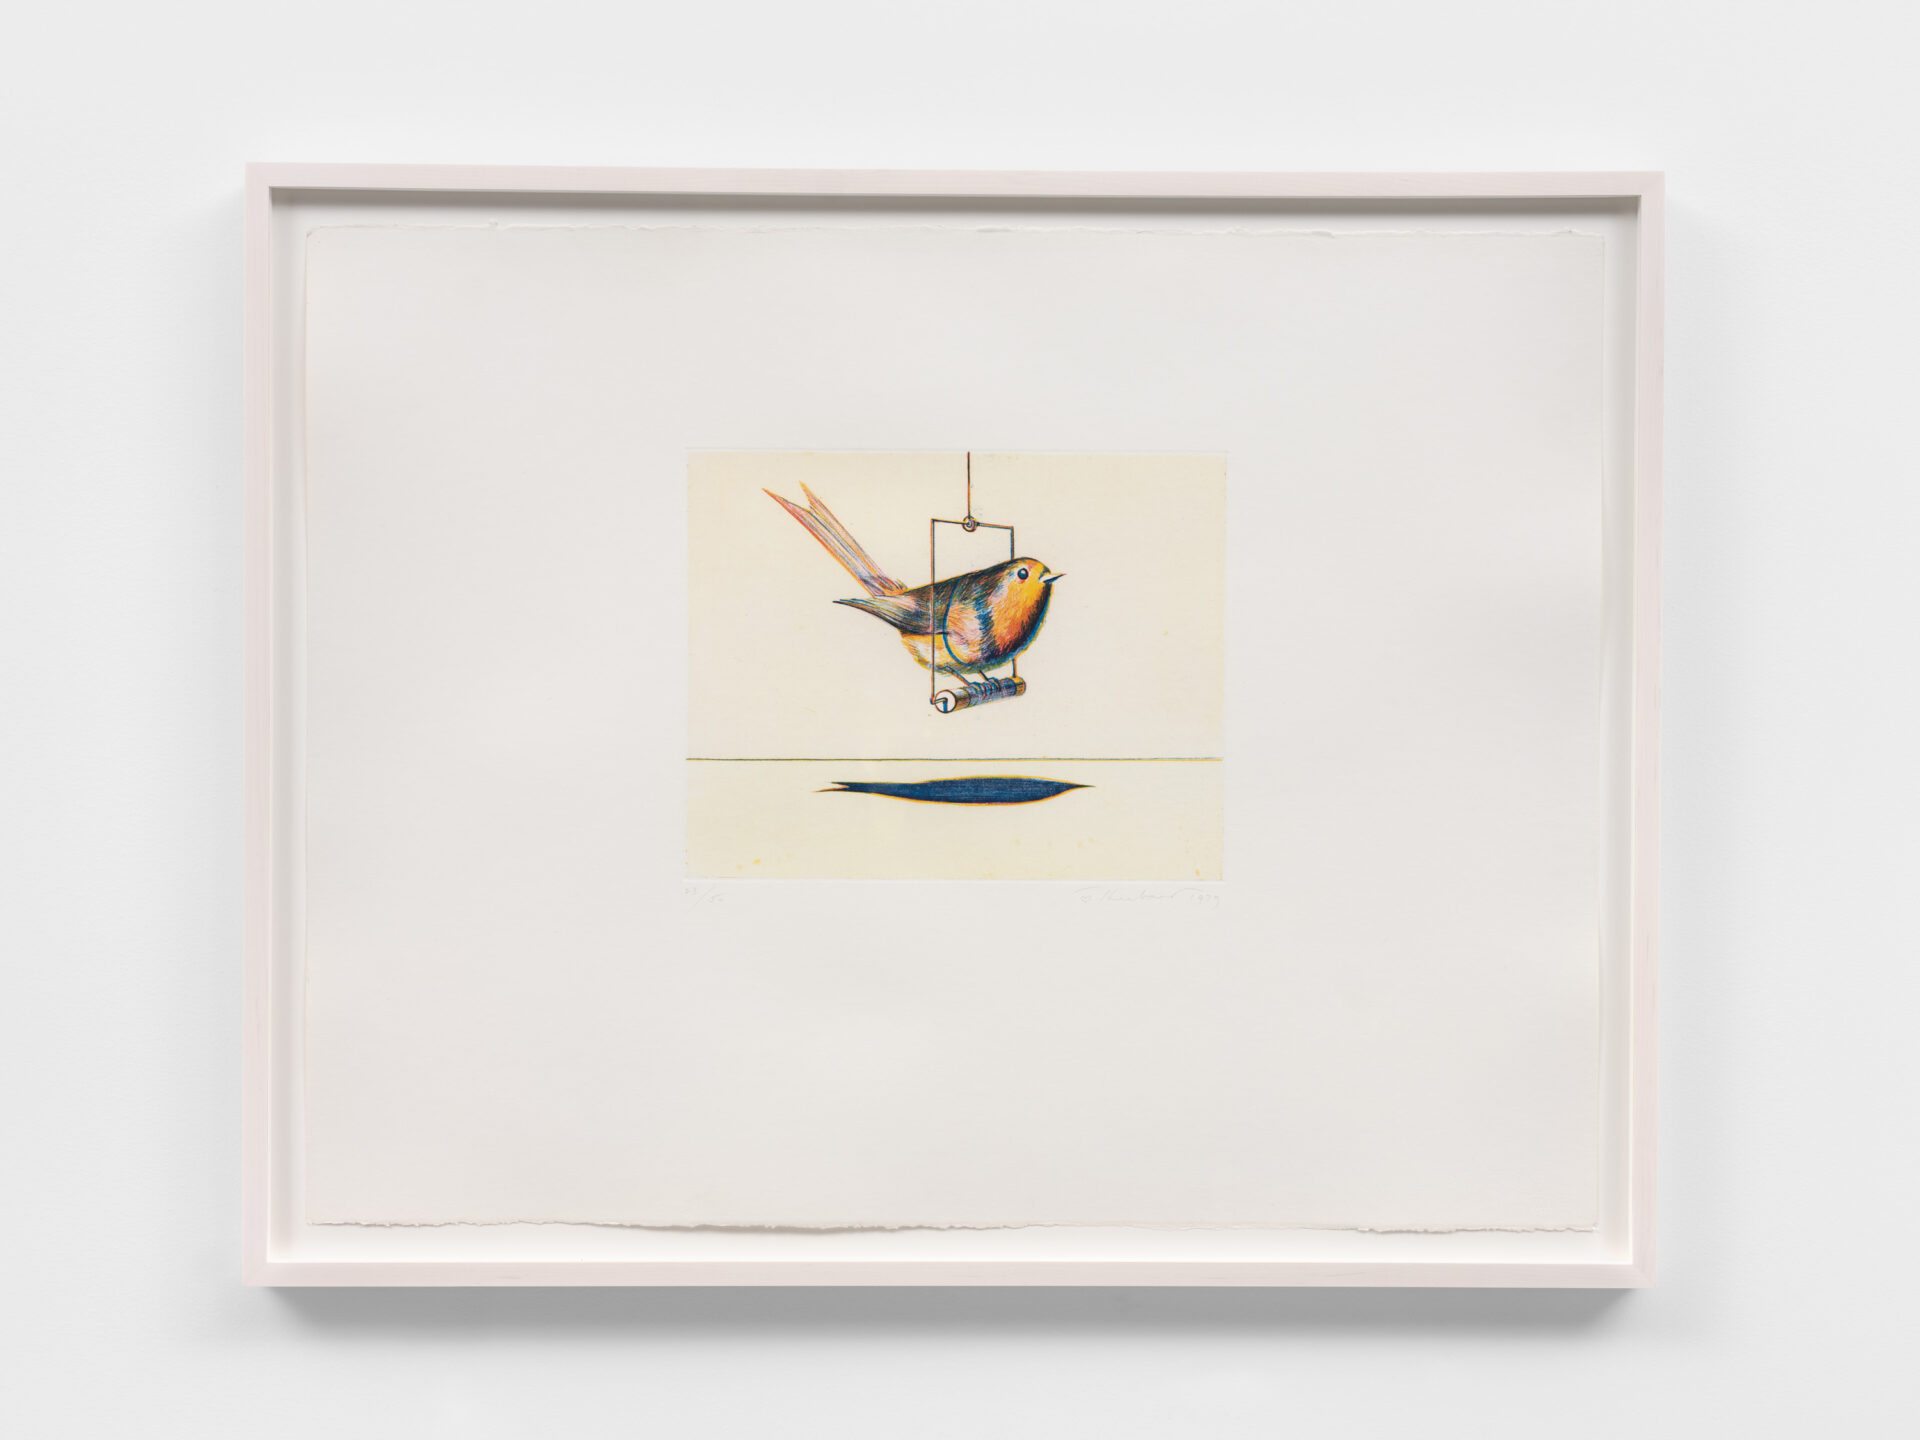 Wayne Thiebaud Bird, 1979 Etching and aquatint Paper Dimensions: 22 x 30 inches (55.9 x 76.2 cm) Framed Dimensions: 25 1/2 x 32 1/4 inches (64.8 x 81.9 cm) Edition of 50